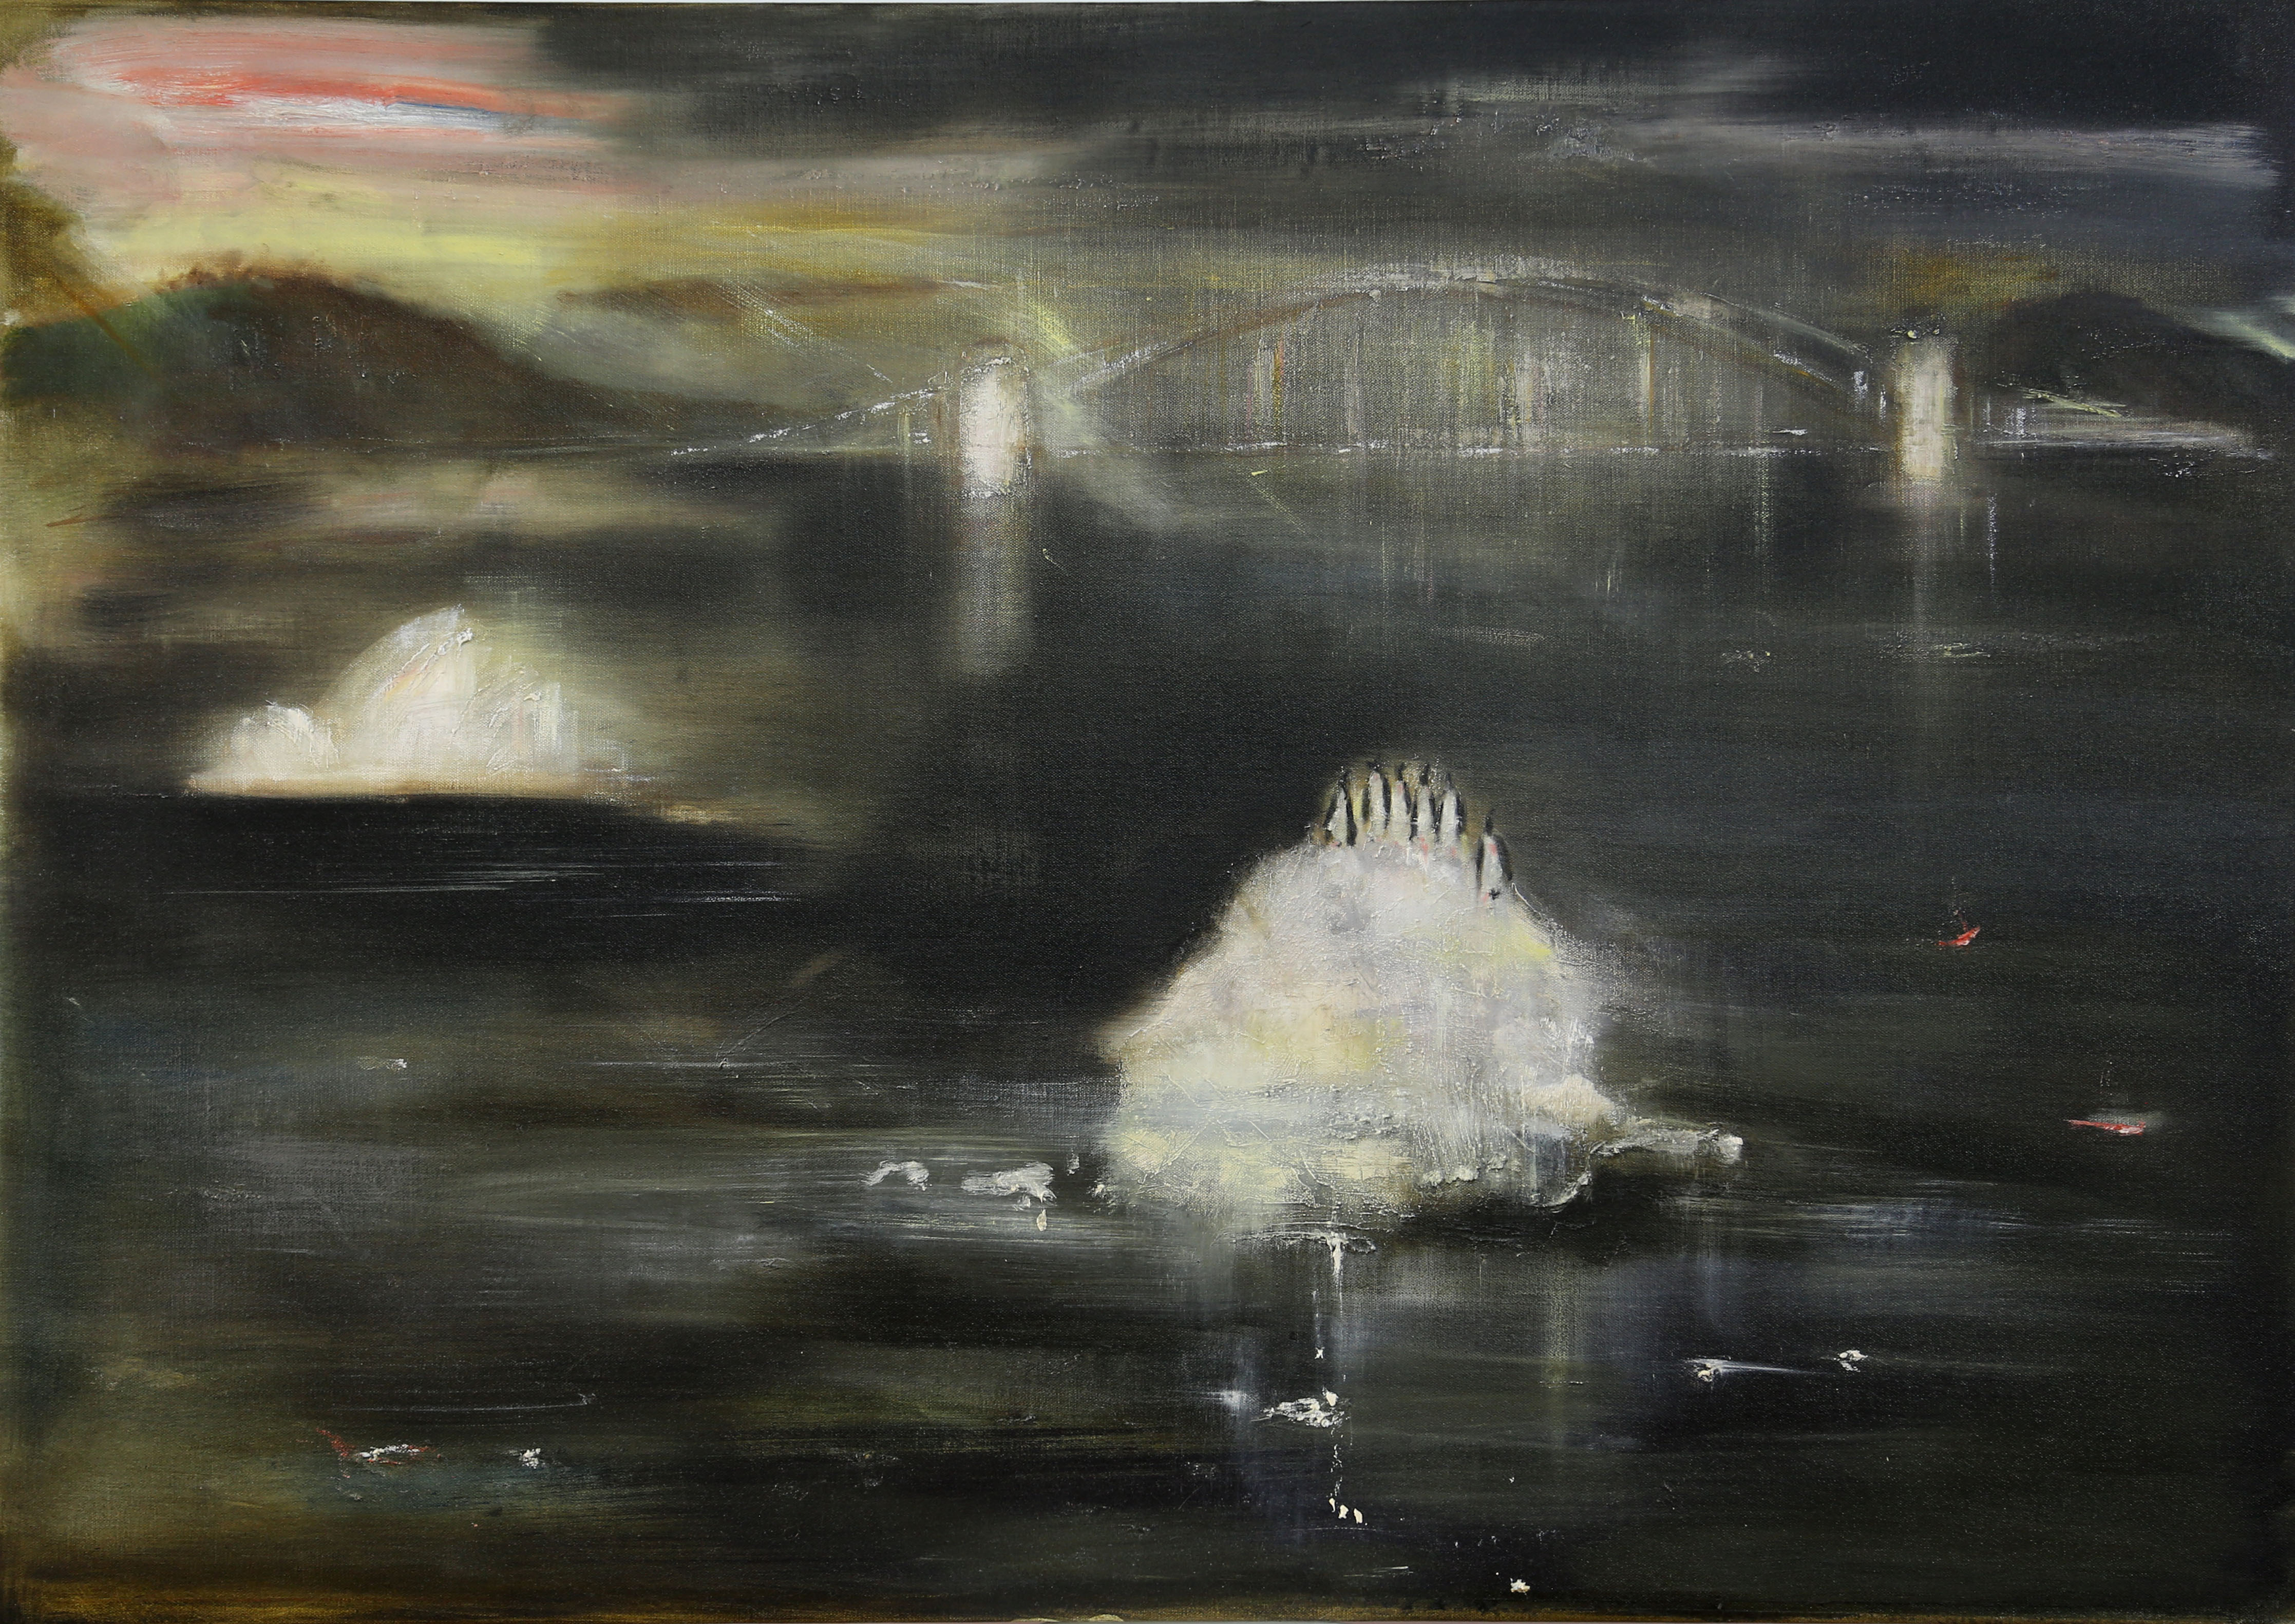 Rodney_Rople_Sydney_Harbour_2019_oil_on_linen_96_x_136cm._Donated_by_Felicity_Fenner_through_the_Cultural_Gifts_Program_2020.JPG